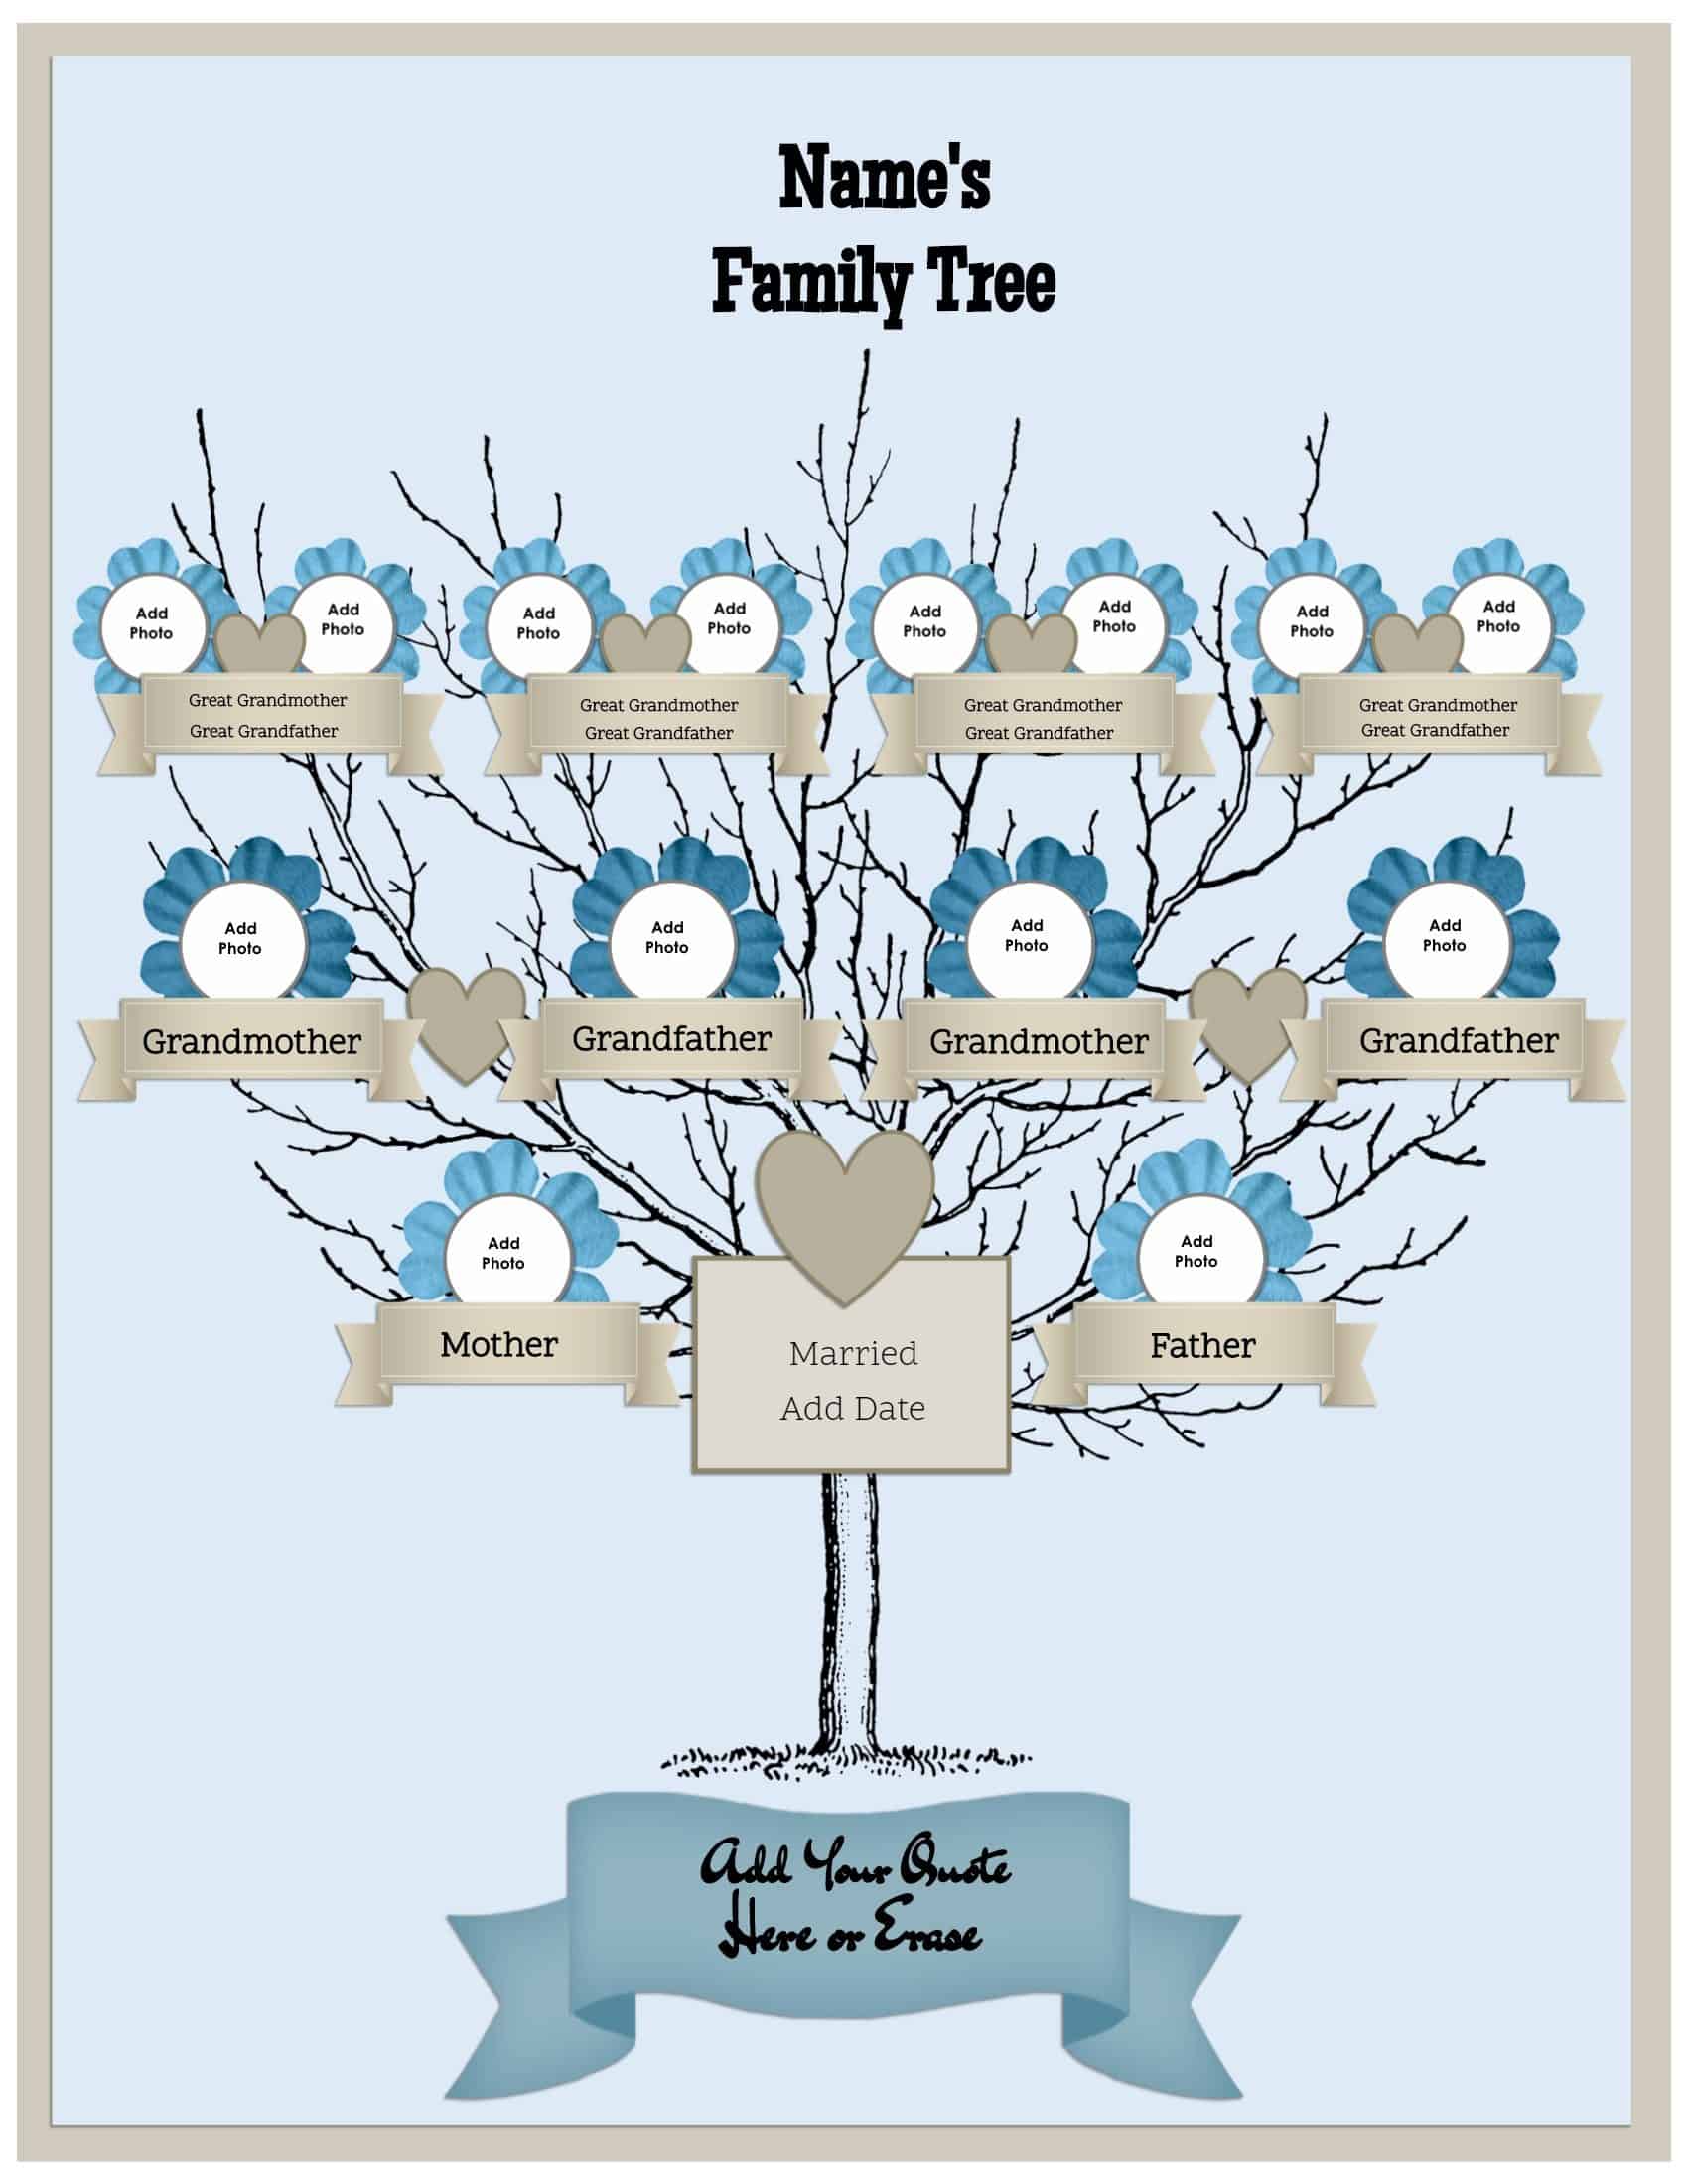 3-generation-family-tree-generator-all-templates-are-free-to-customize